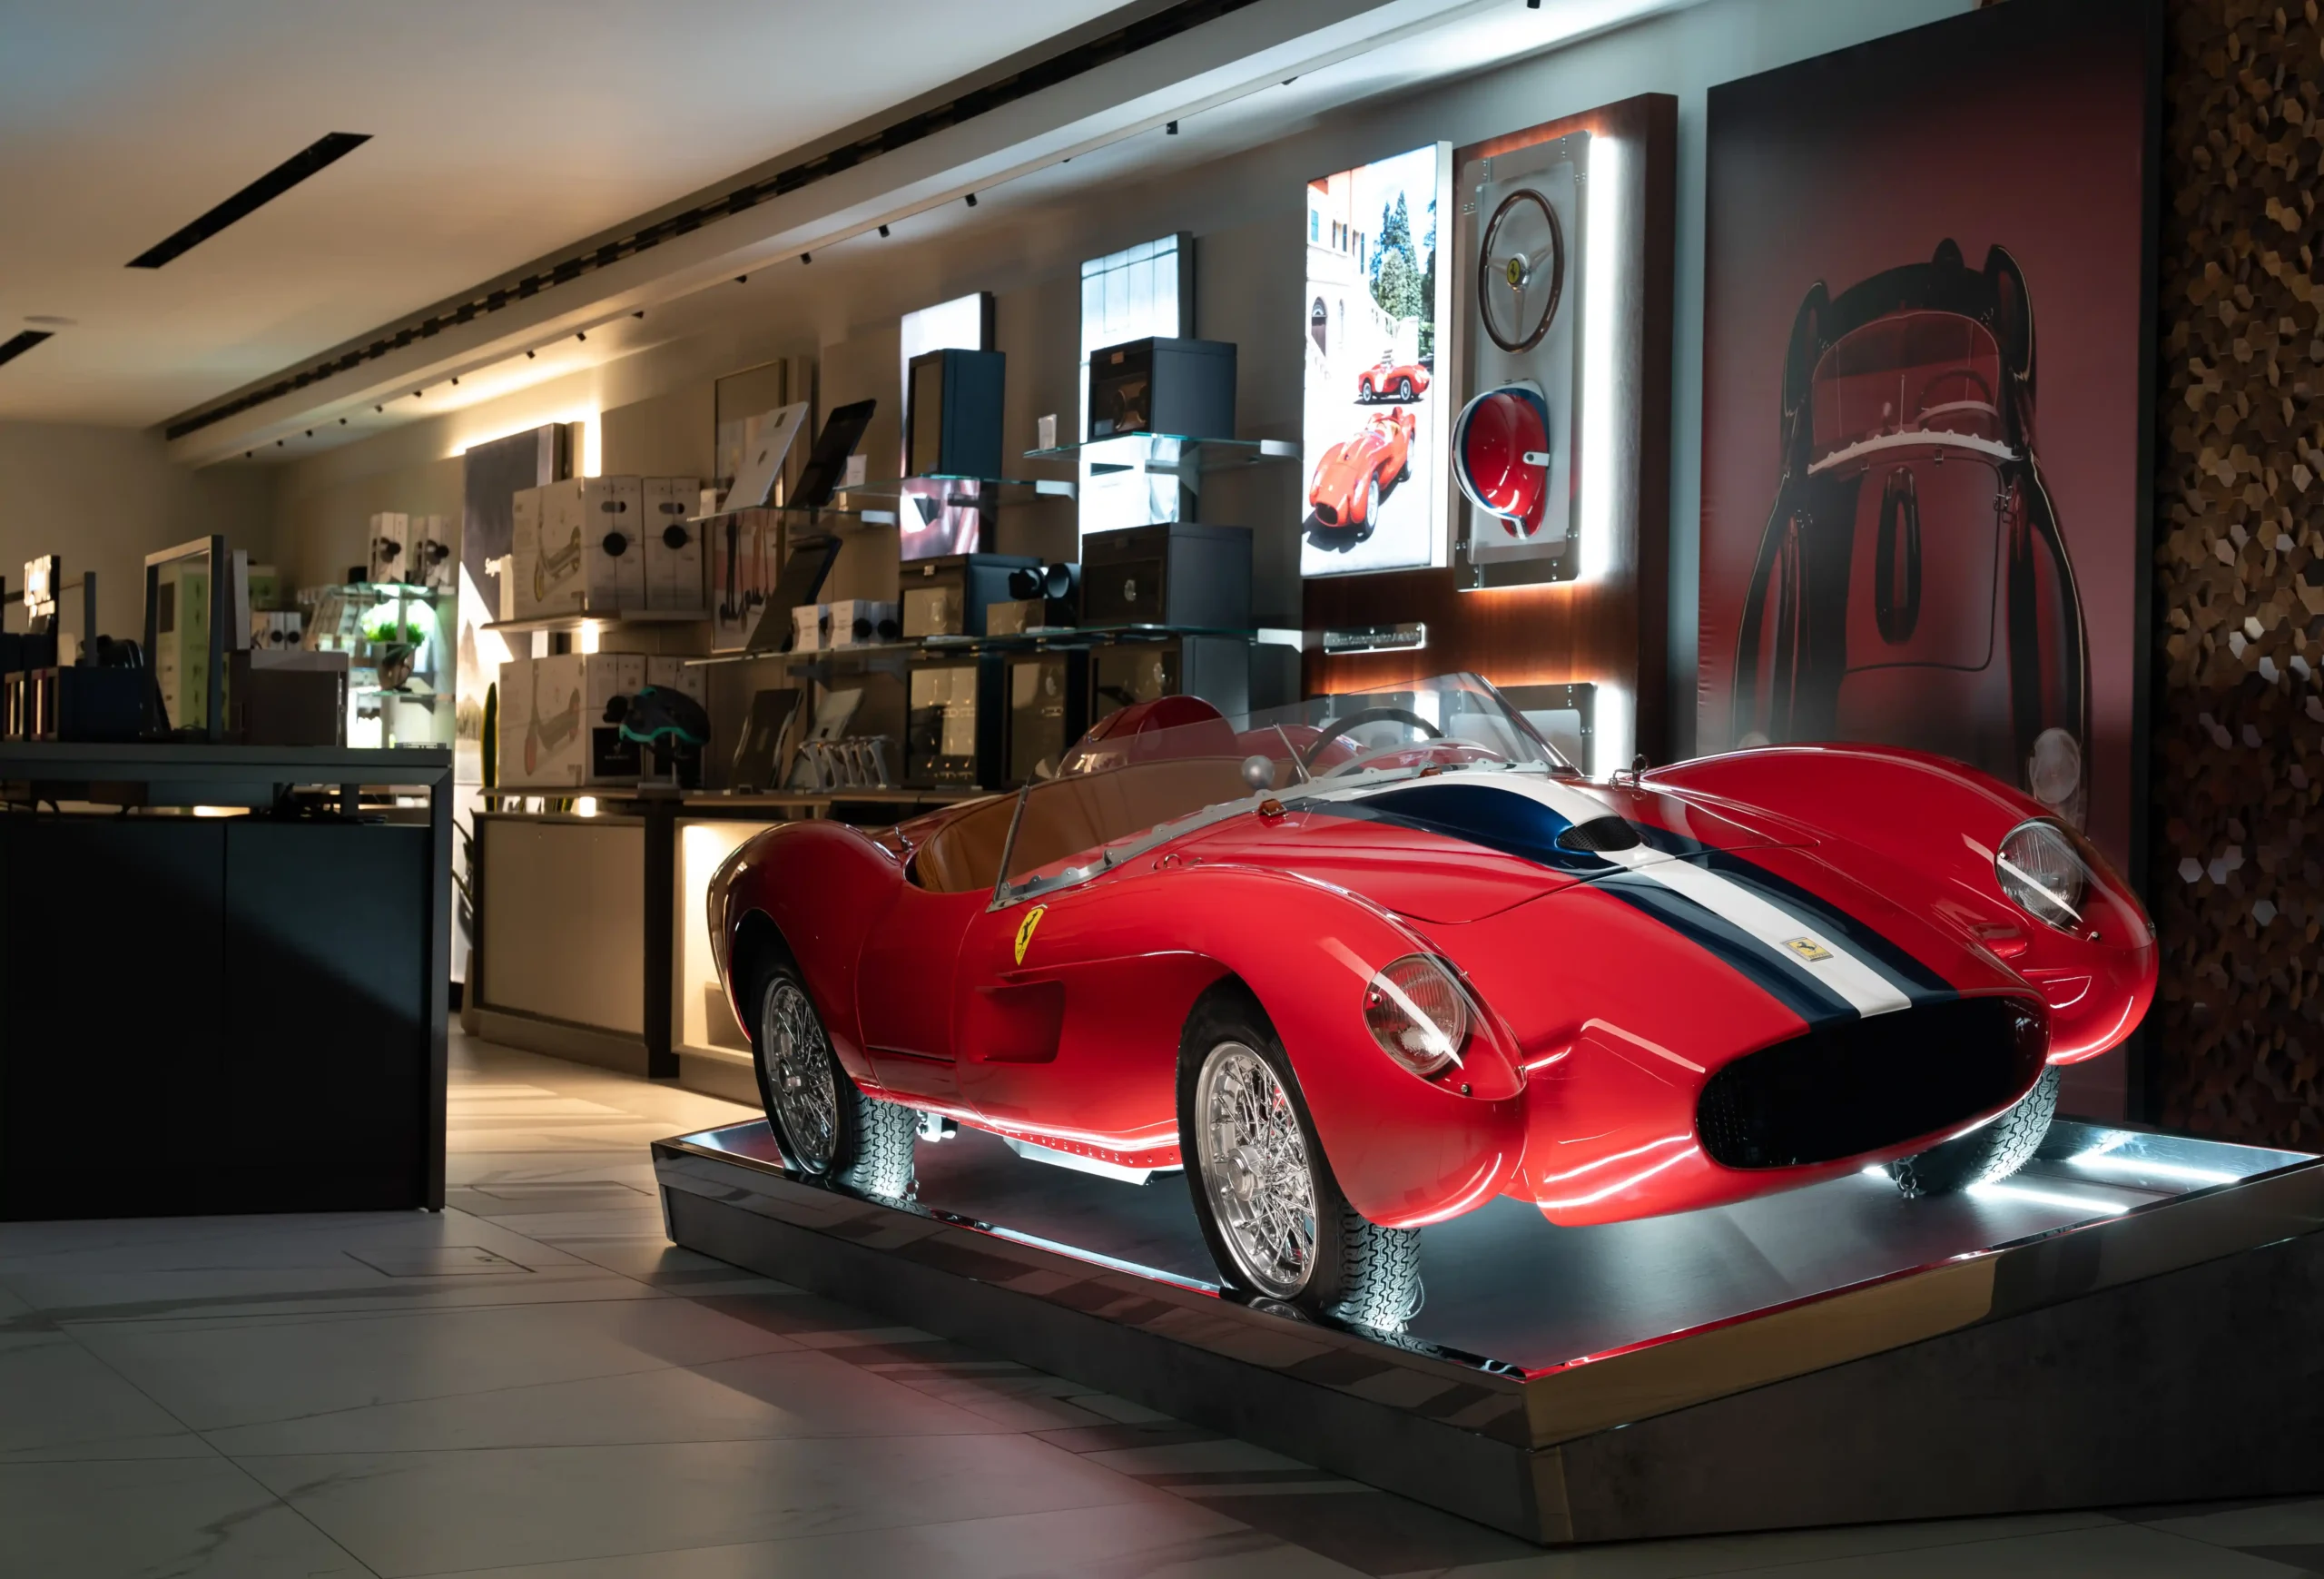 The Ferrari Testa Rossa J. The ultimate toy car on sale in Harrods for Christmas